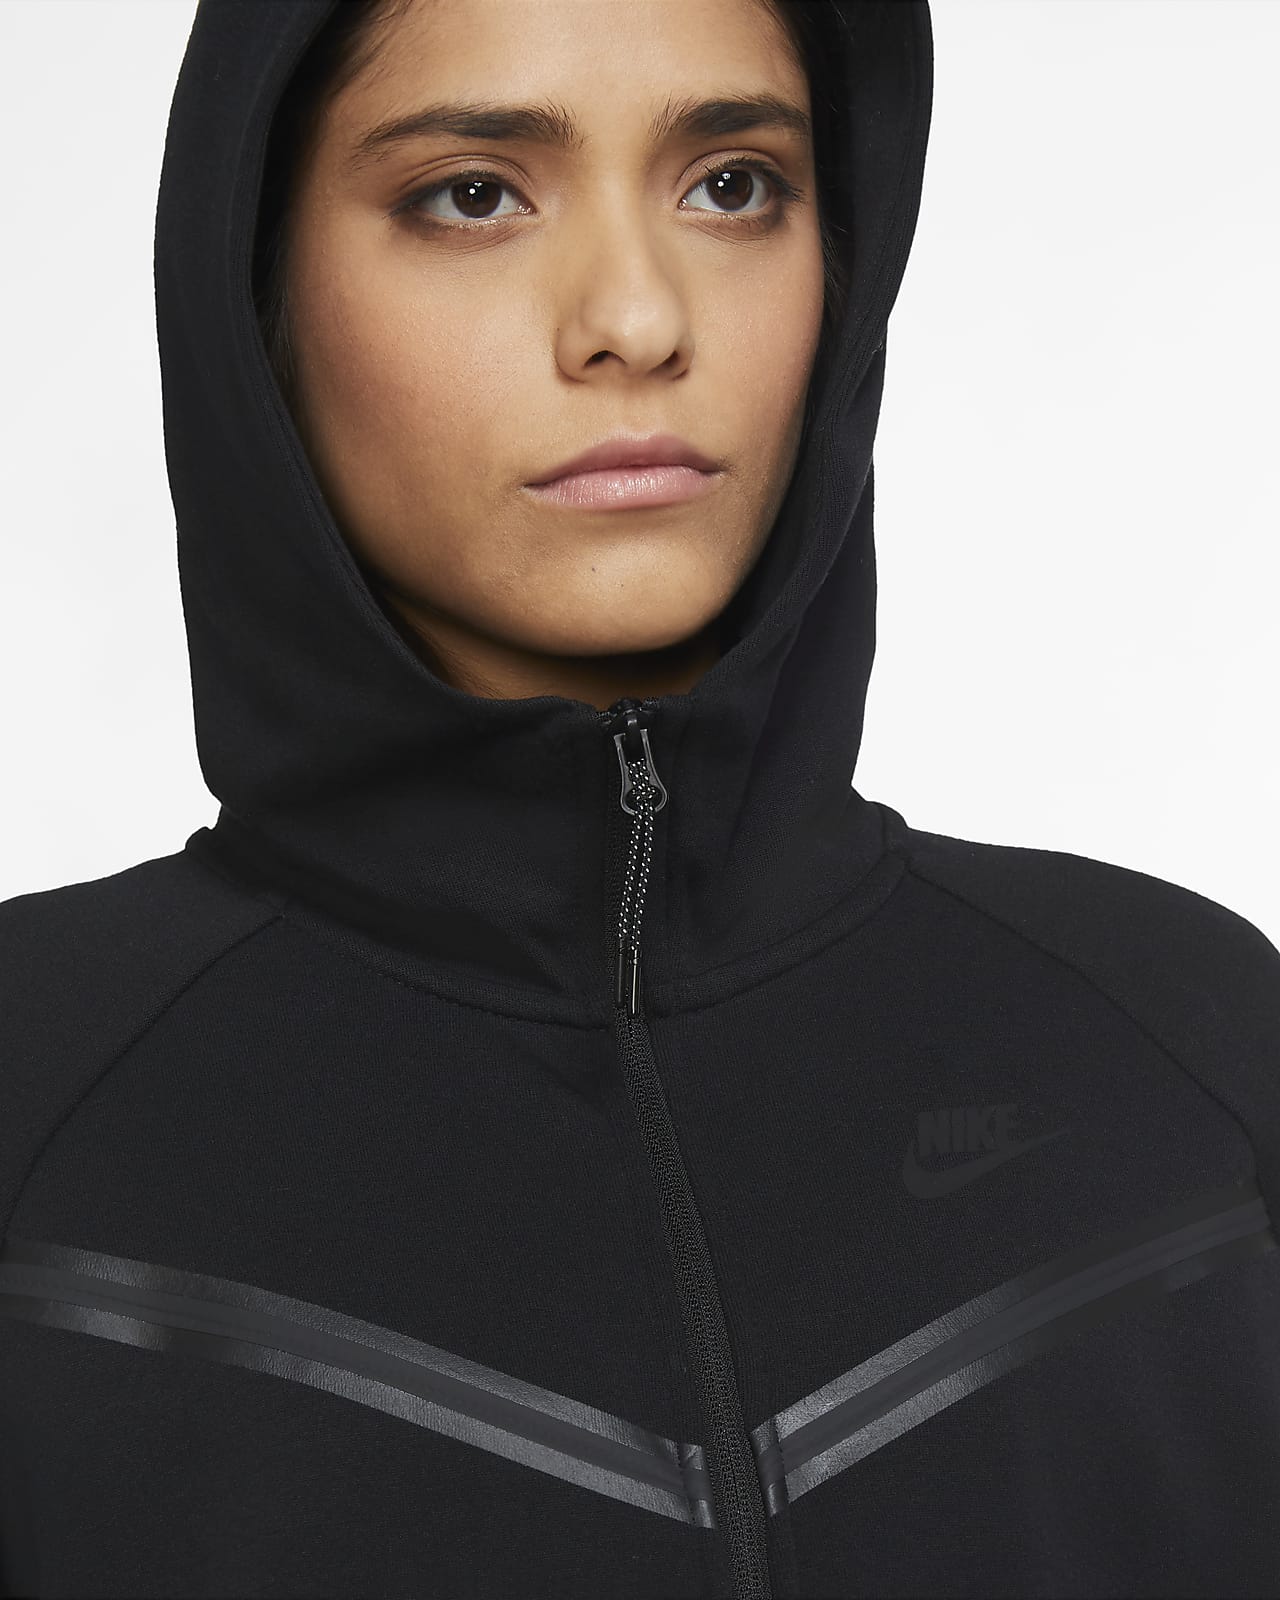 The guests Ship shape Large quantity nike tech fleece windrunner